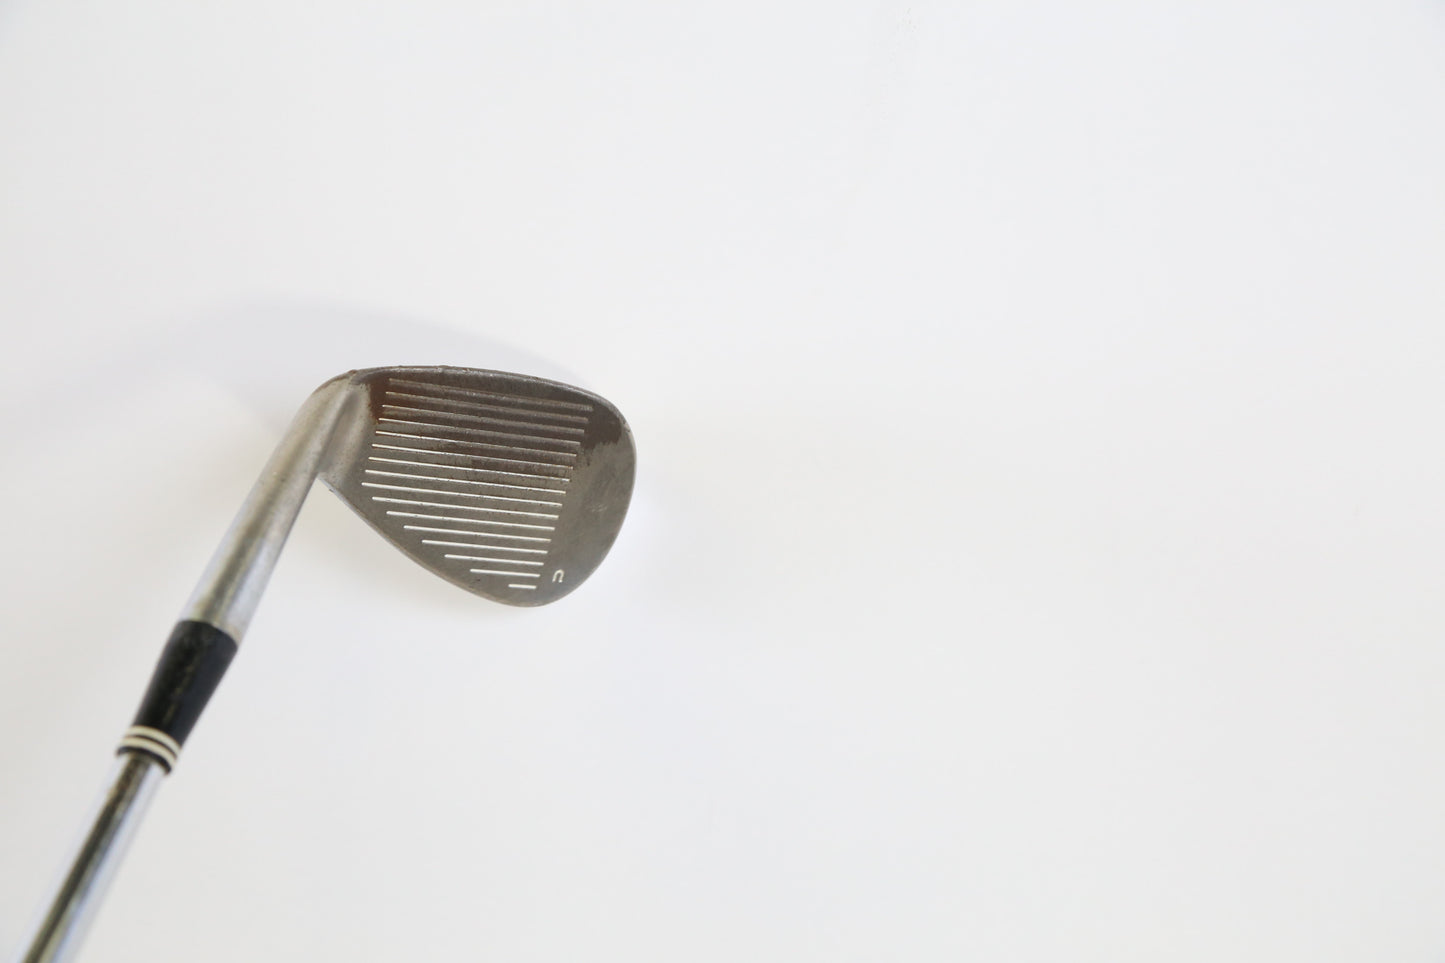 Used Cleveland 588 Chrome Sand Wedge - Right-Handed - 56 Degrees - Stiff Flex